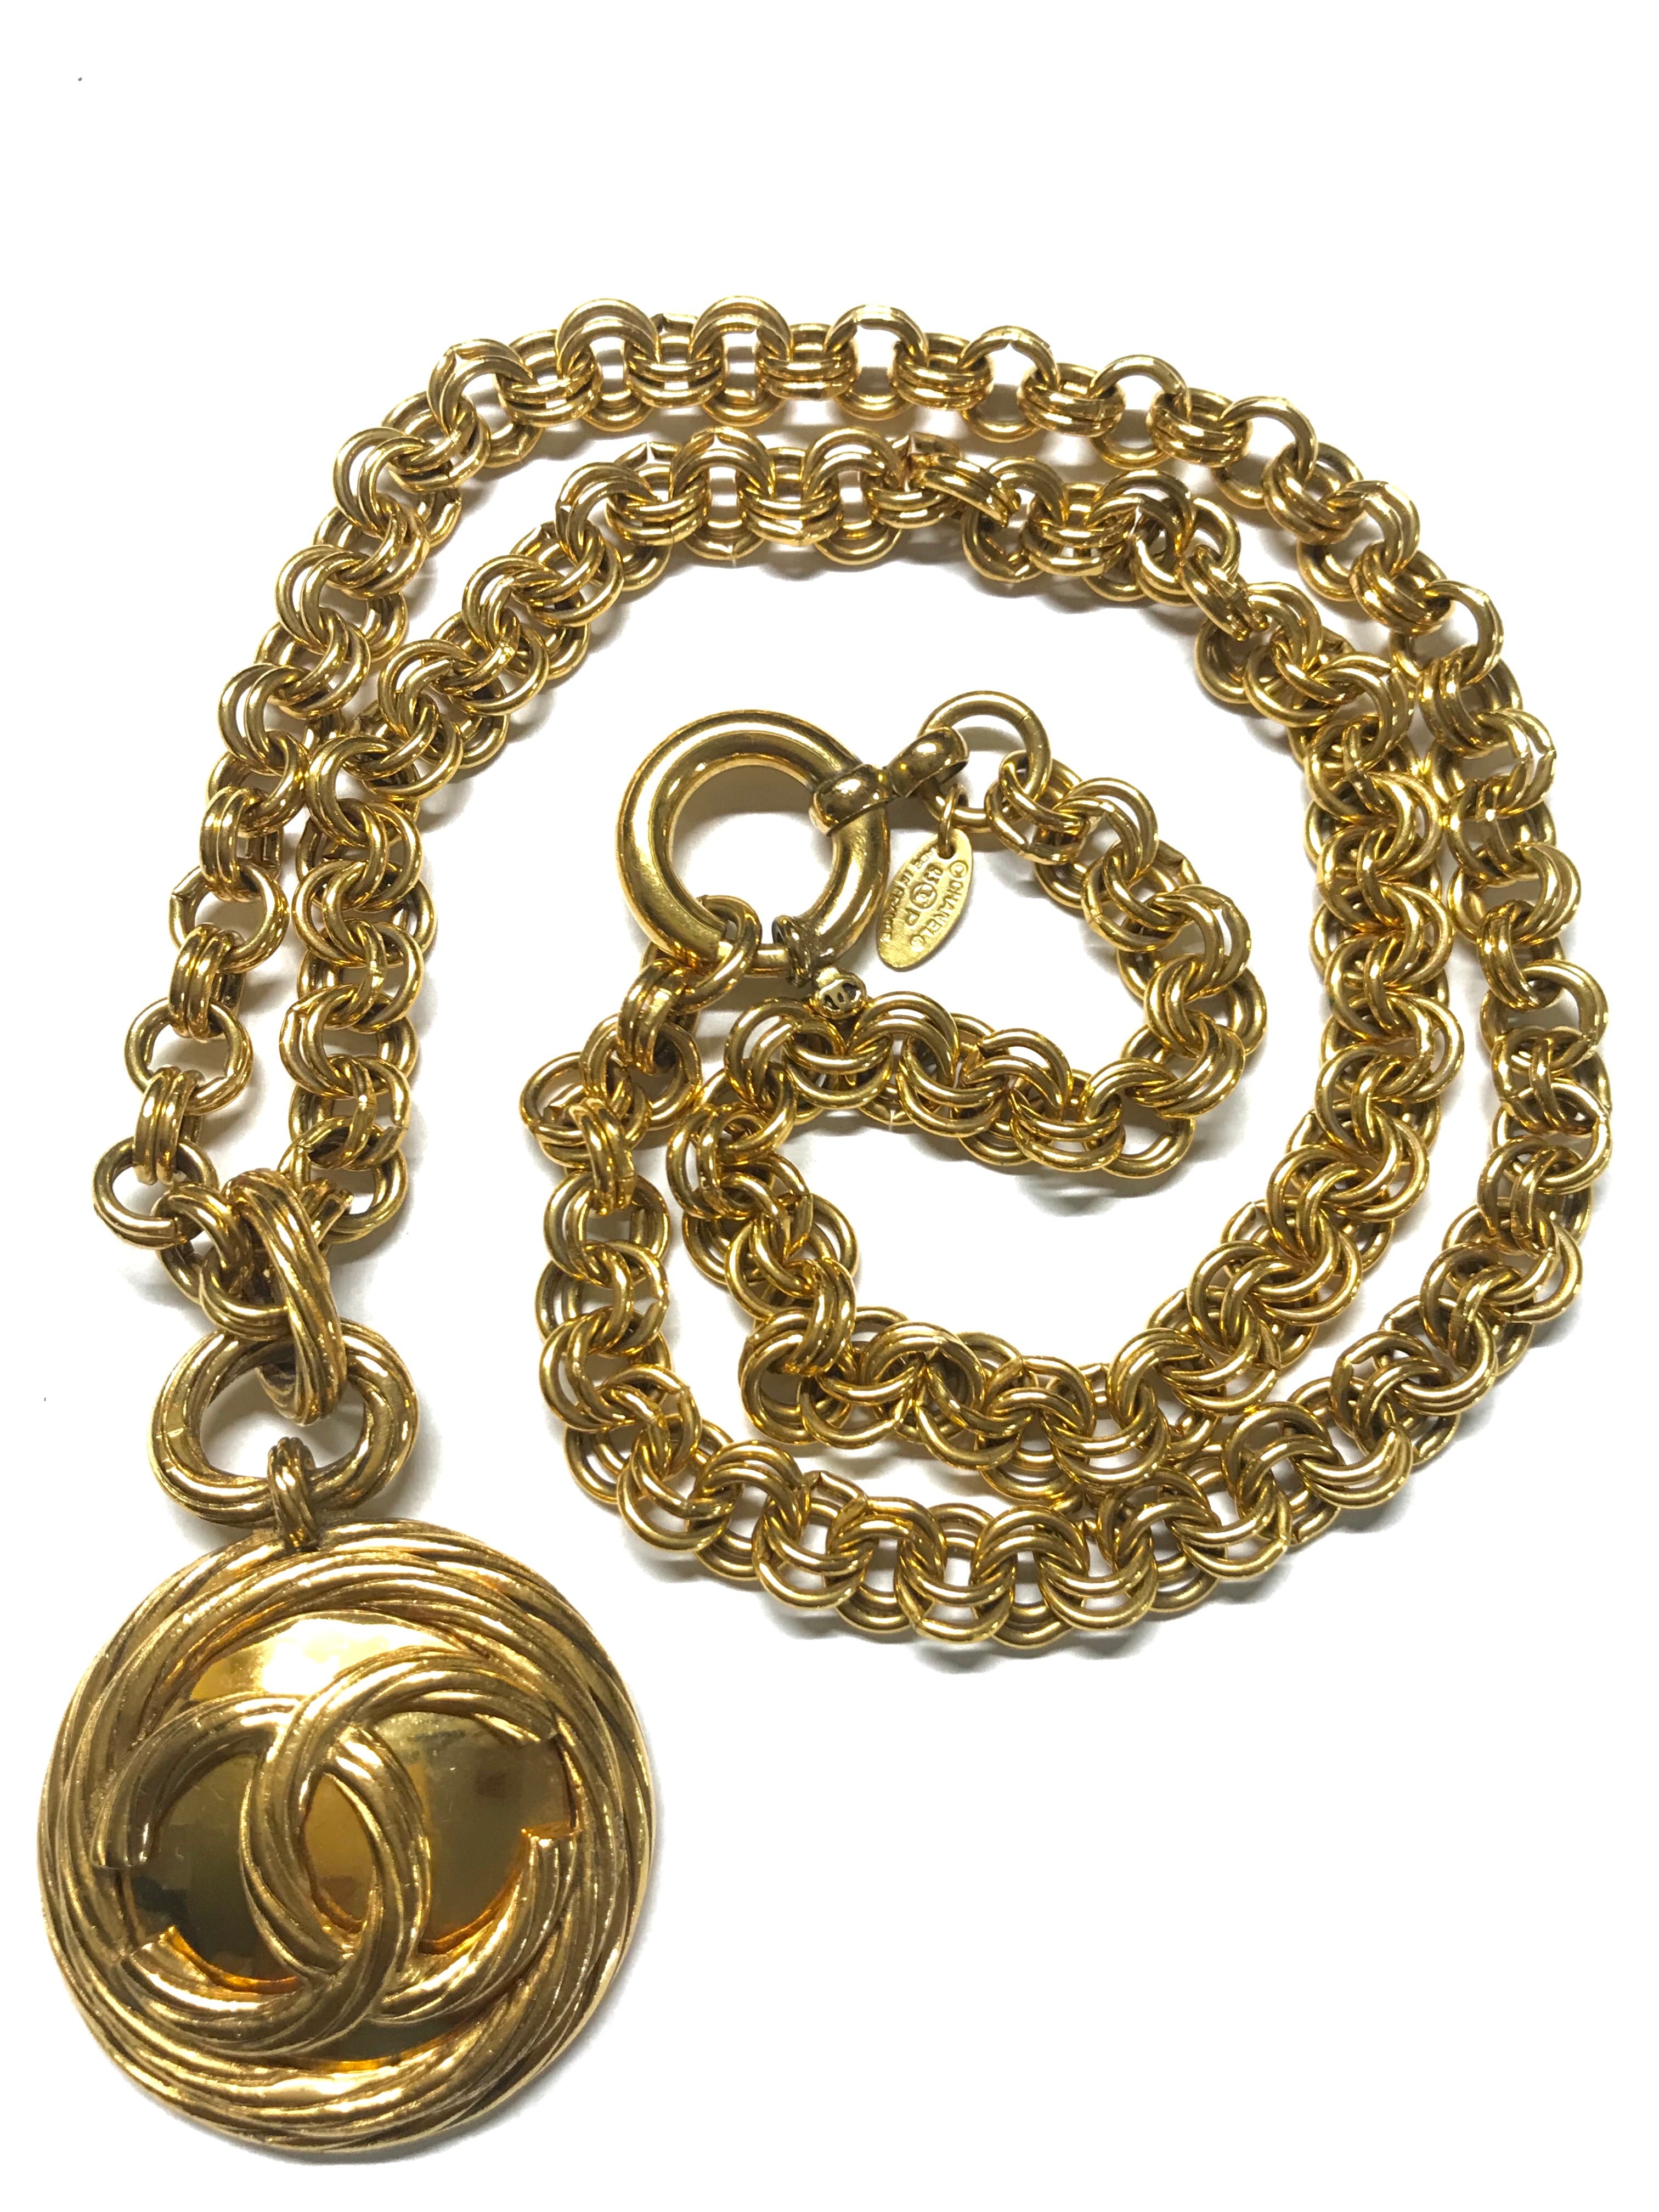 Vintage CHANEL long chain necklace with round mirror amd twisted